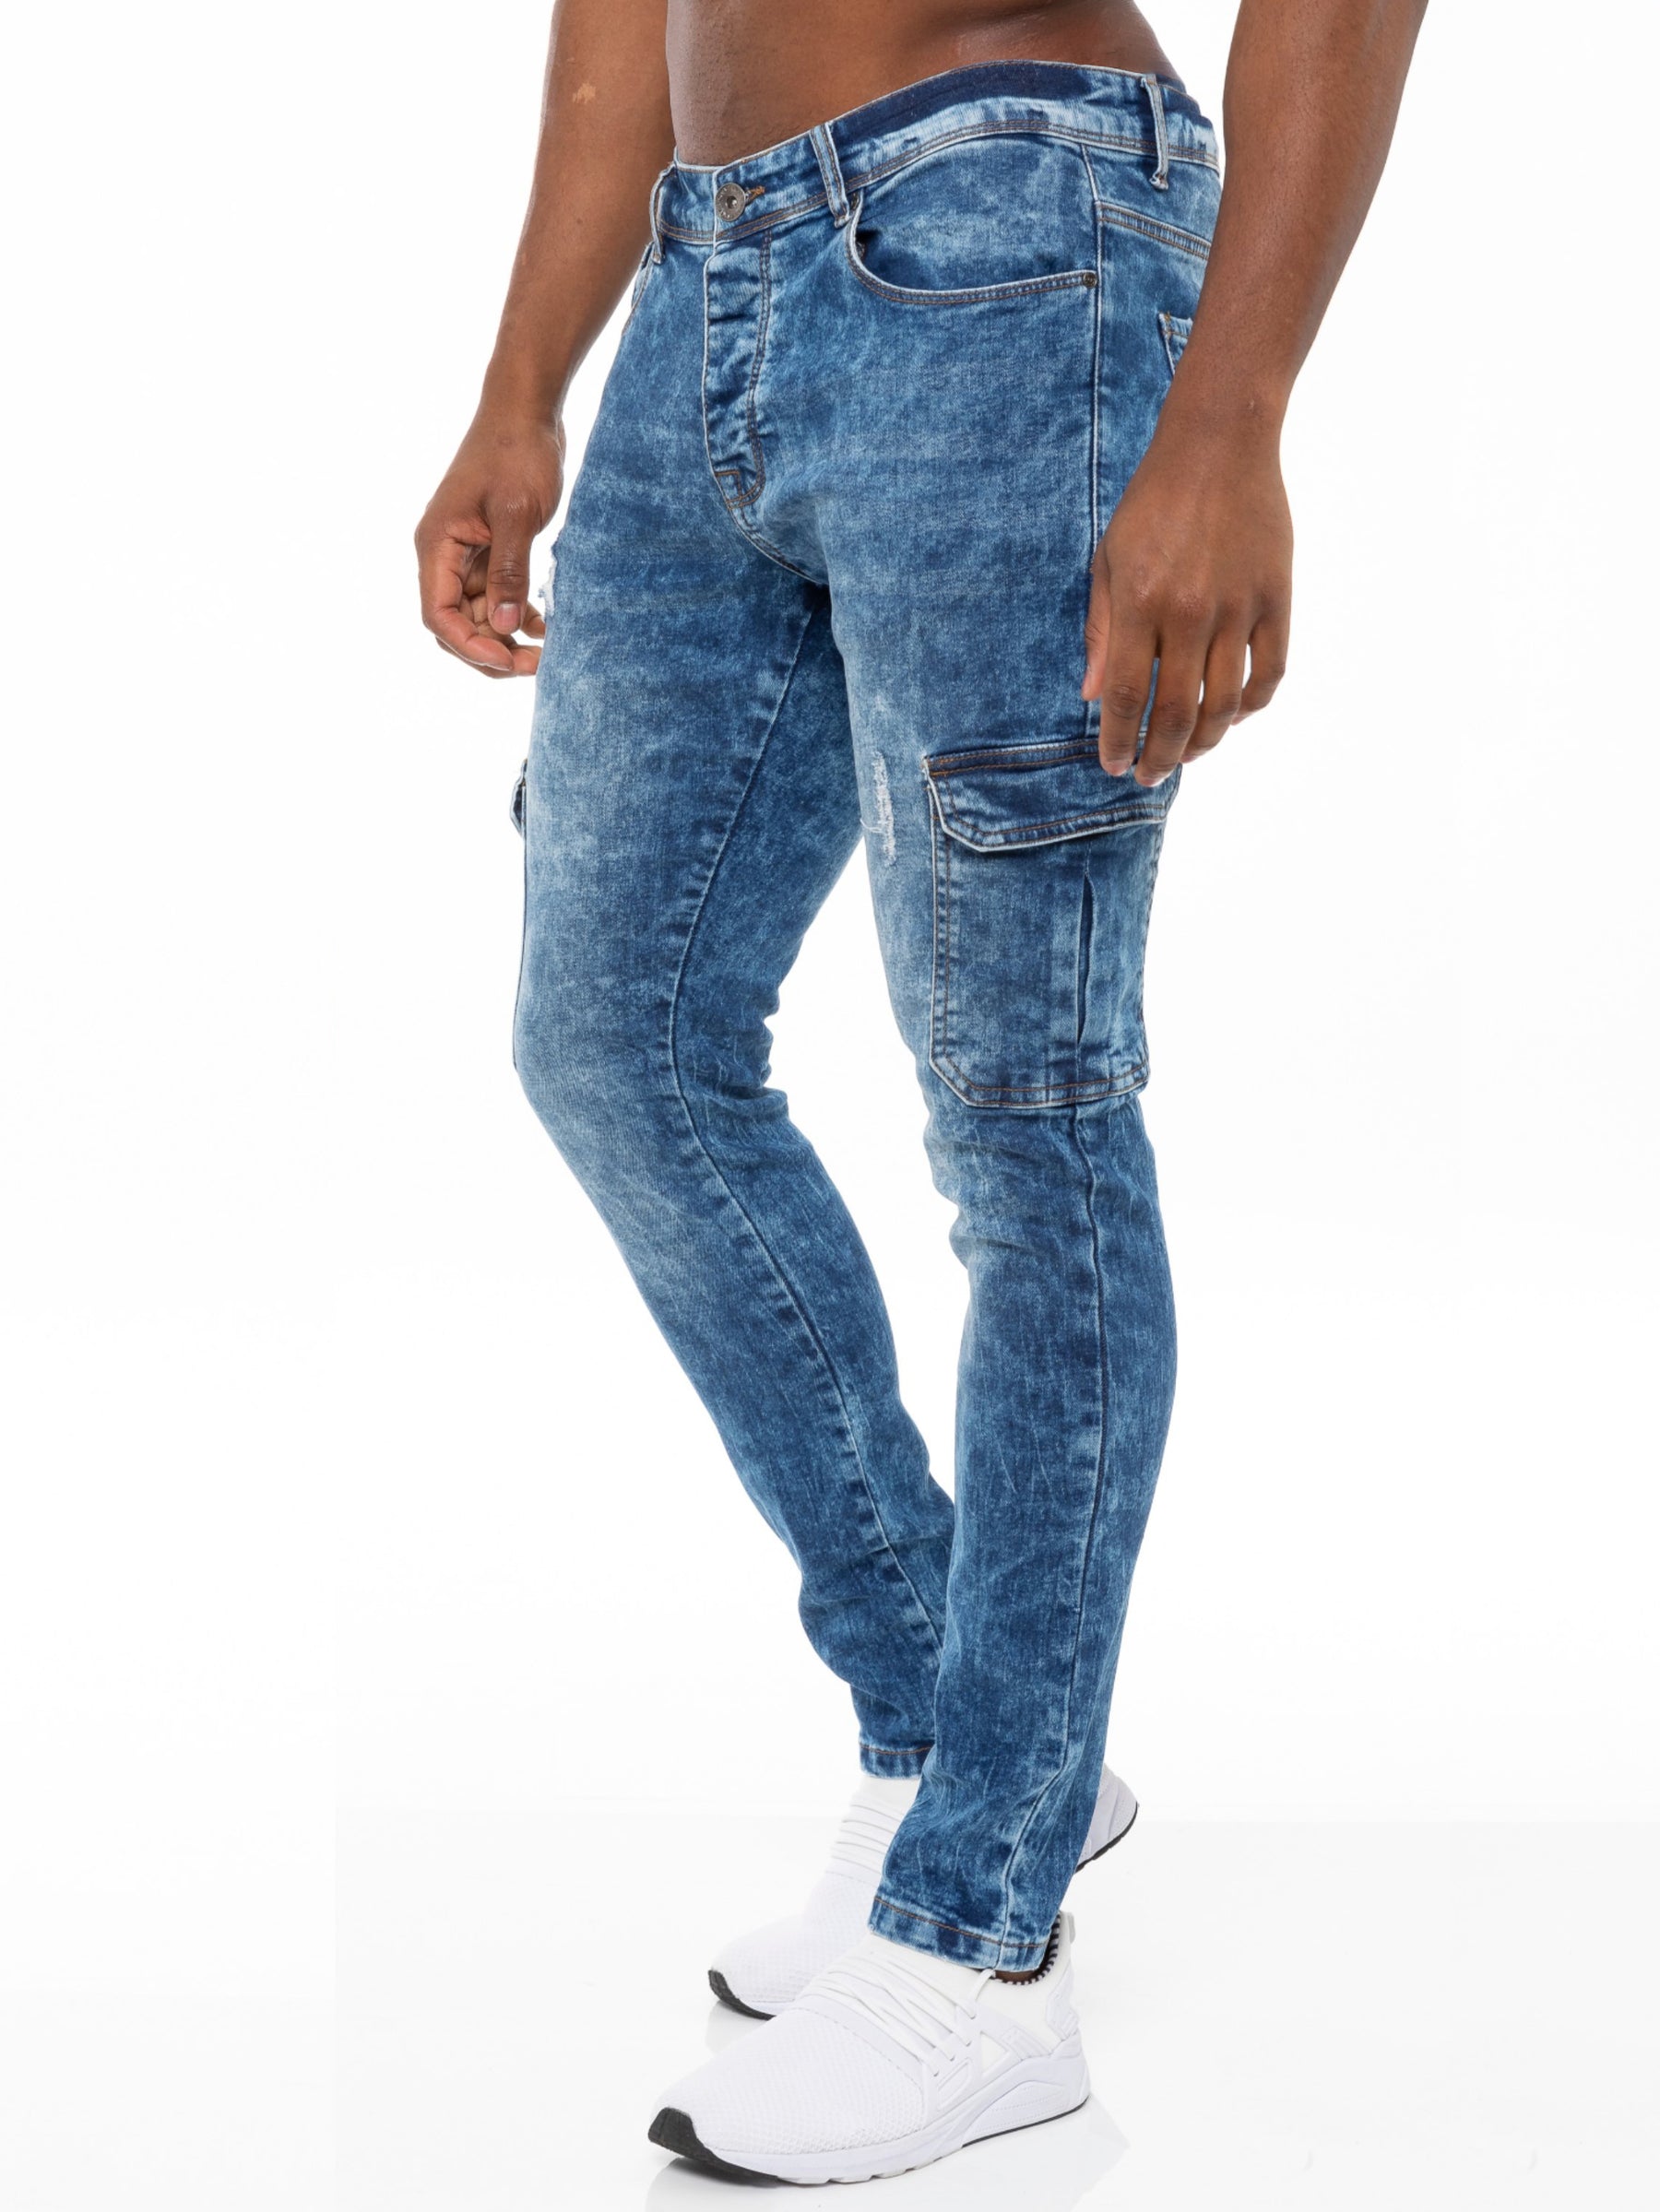 Buy Light Blue High Waist Distressed Skinny Jeans For Women - ONLY